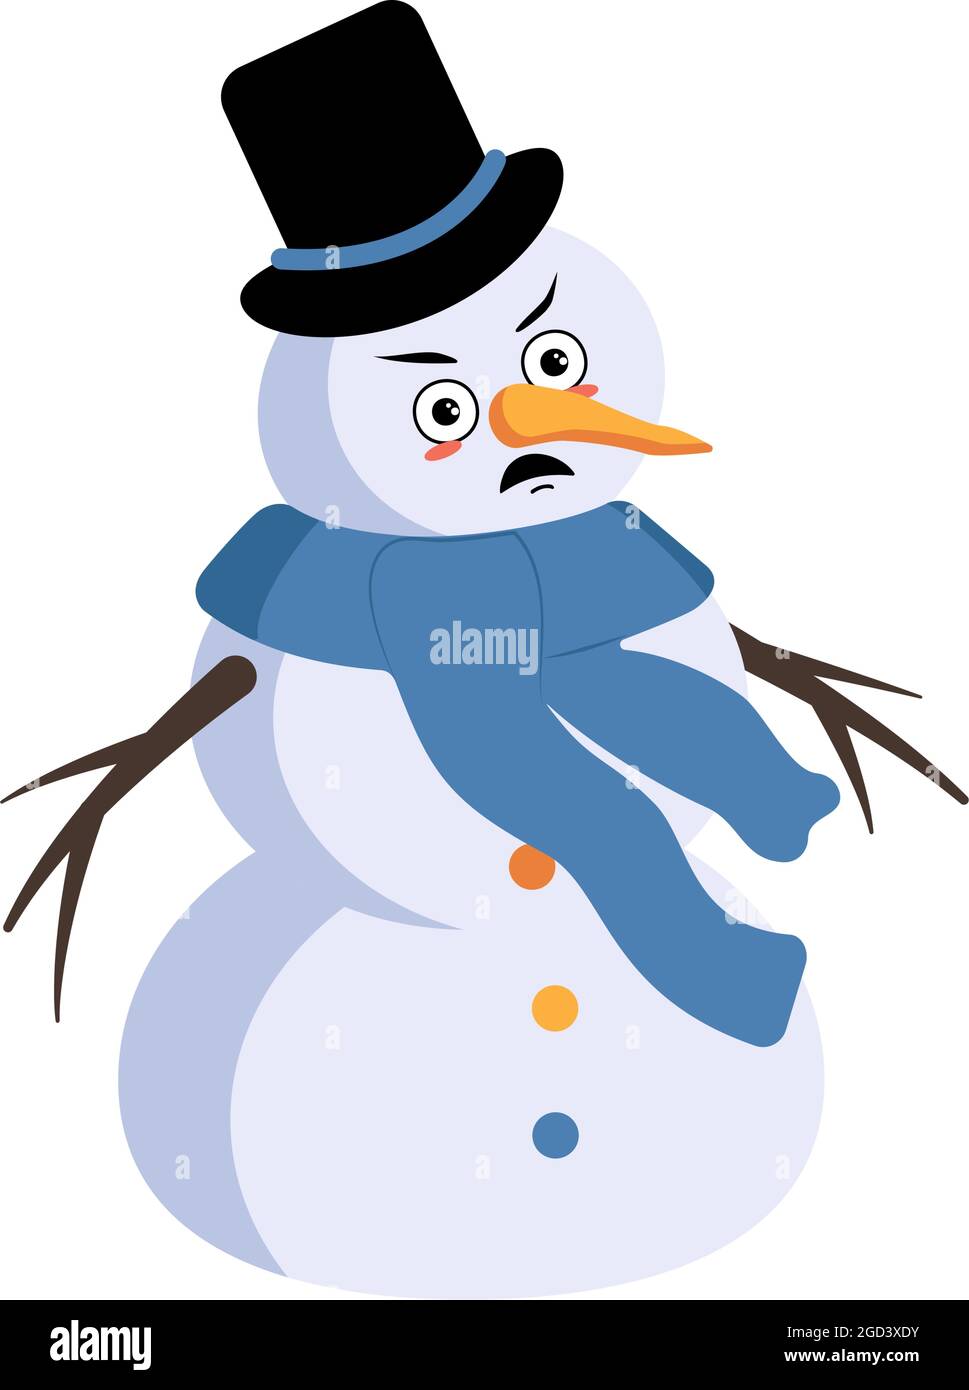 Cute Christmas snowman with angry emotions, grumpy face, arms and legs. Joyful New Year festive decoration with furious expression Stock Vector